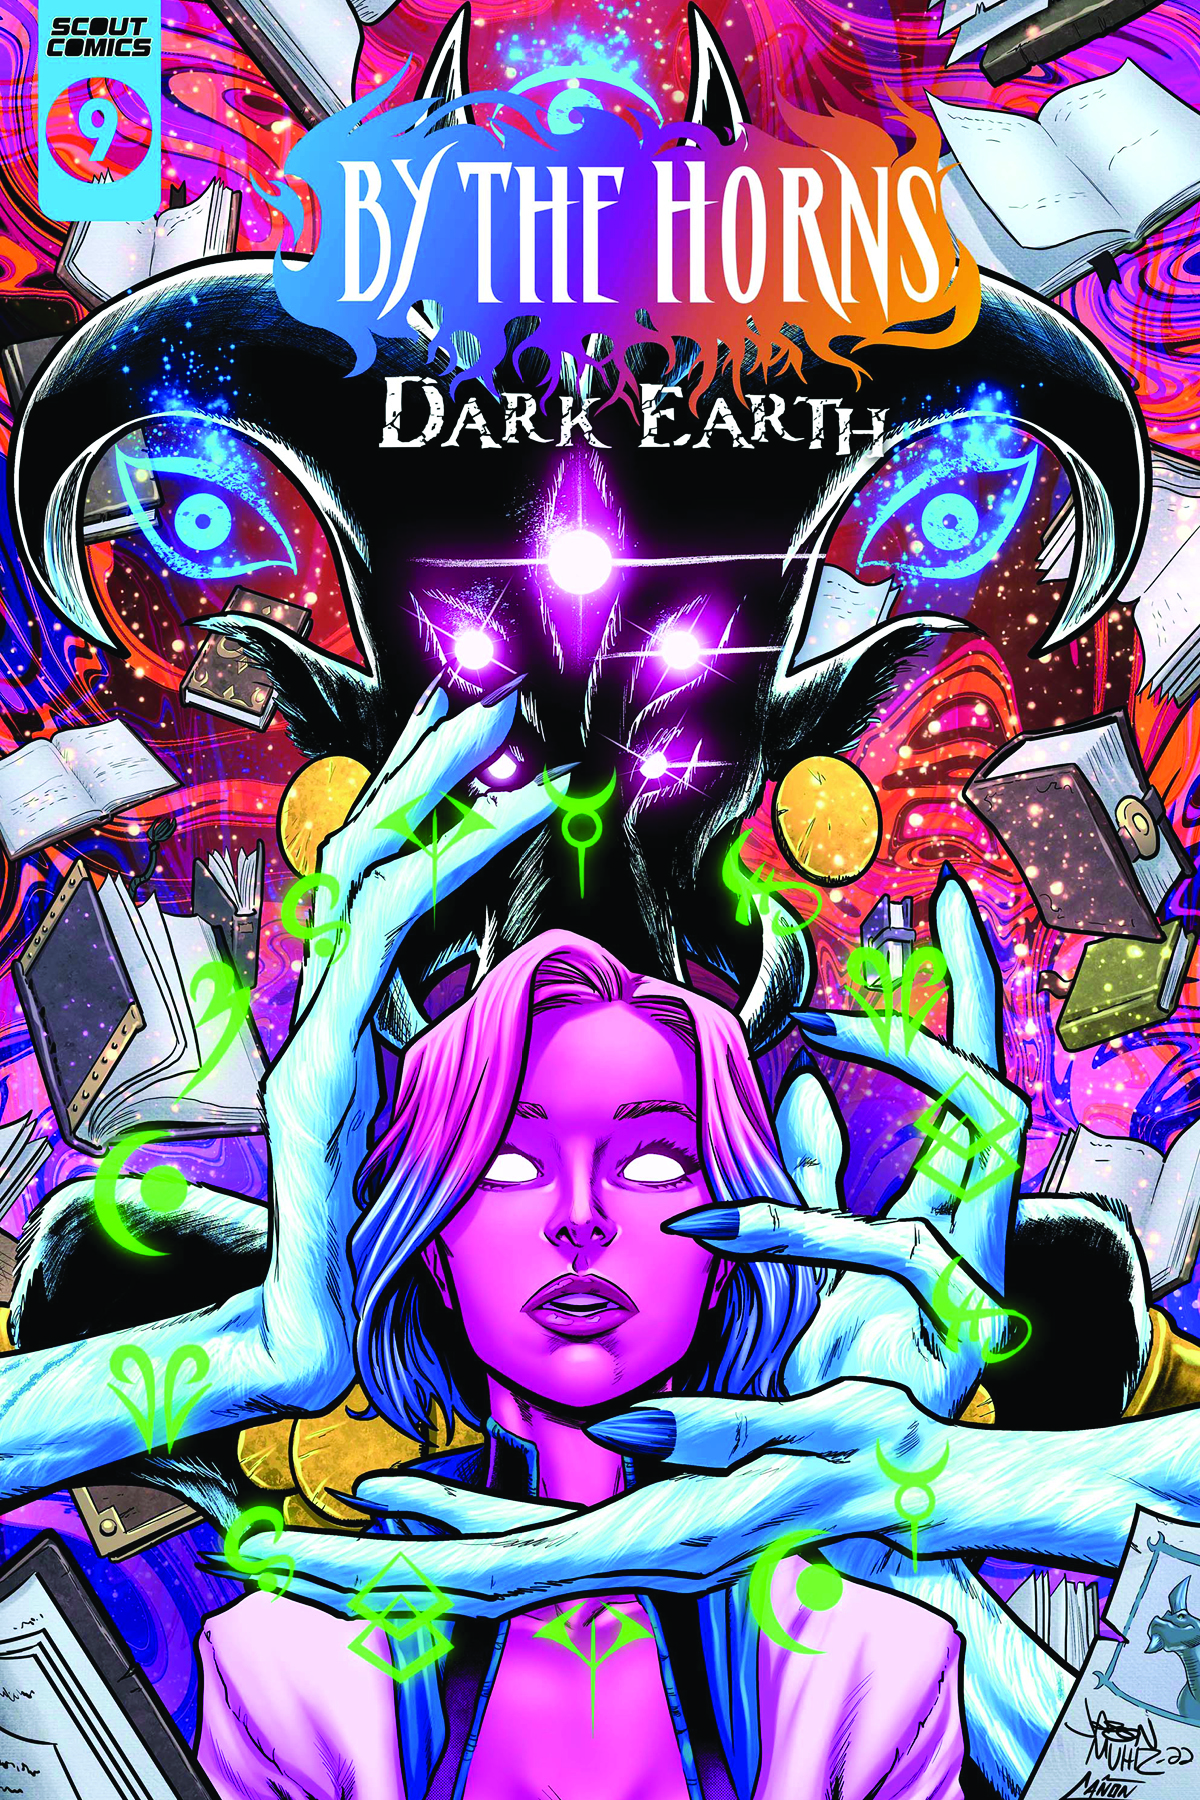 By The Horns Dark Earth #9 (Mature) (Of 9)